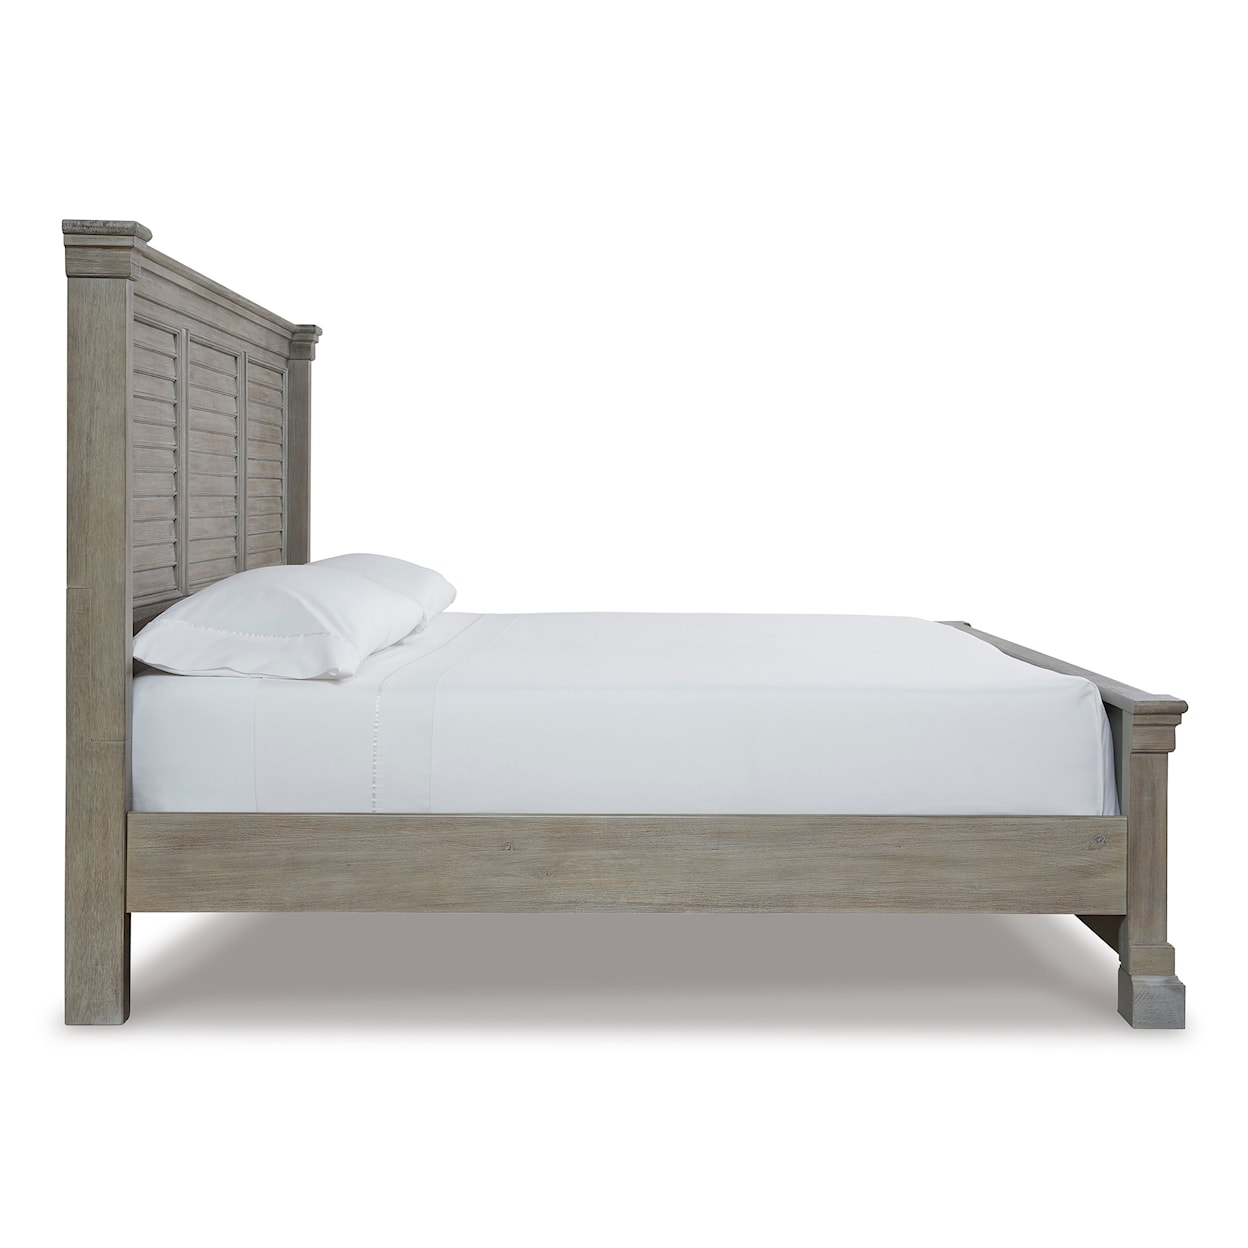 Signature Moreshire King Bed